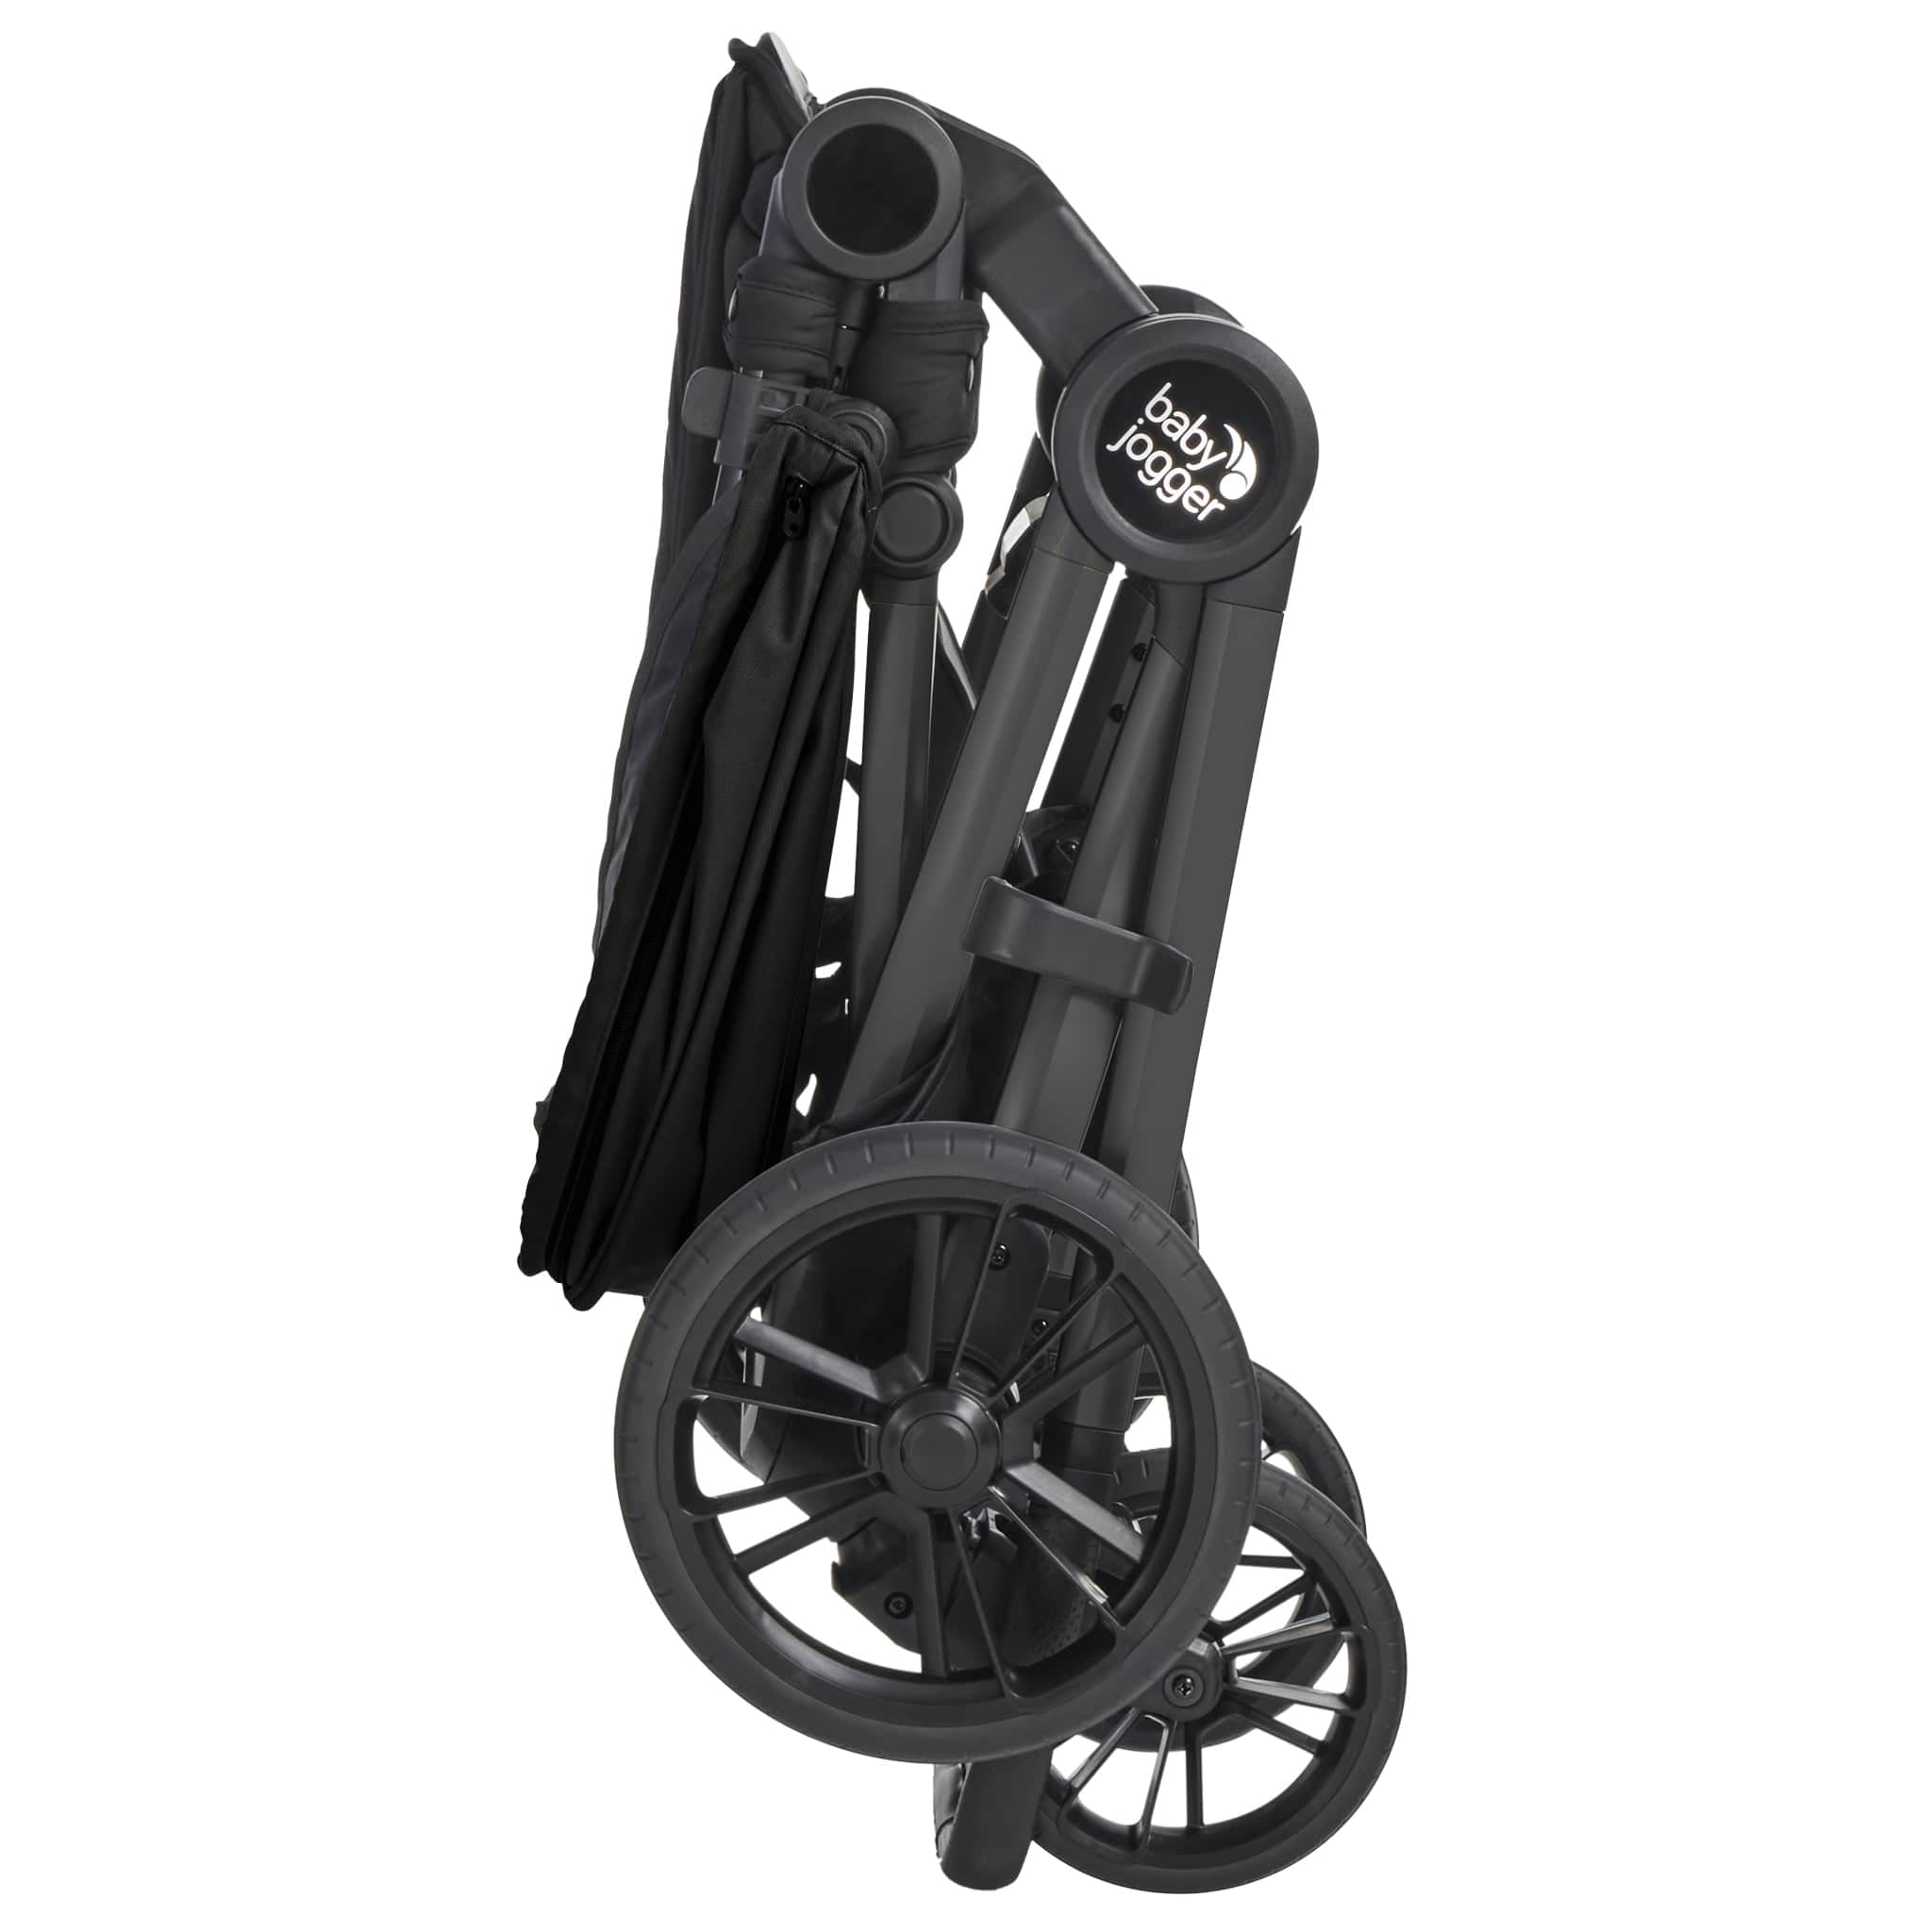 Baby Jogger City Sights Cabriofix i-Size Bundle in Rich Black Pushchairs & Buggies 0047406183685